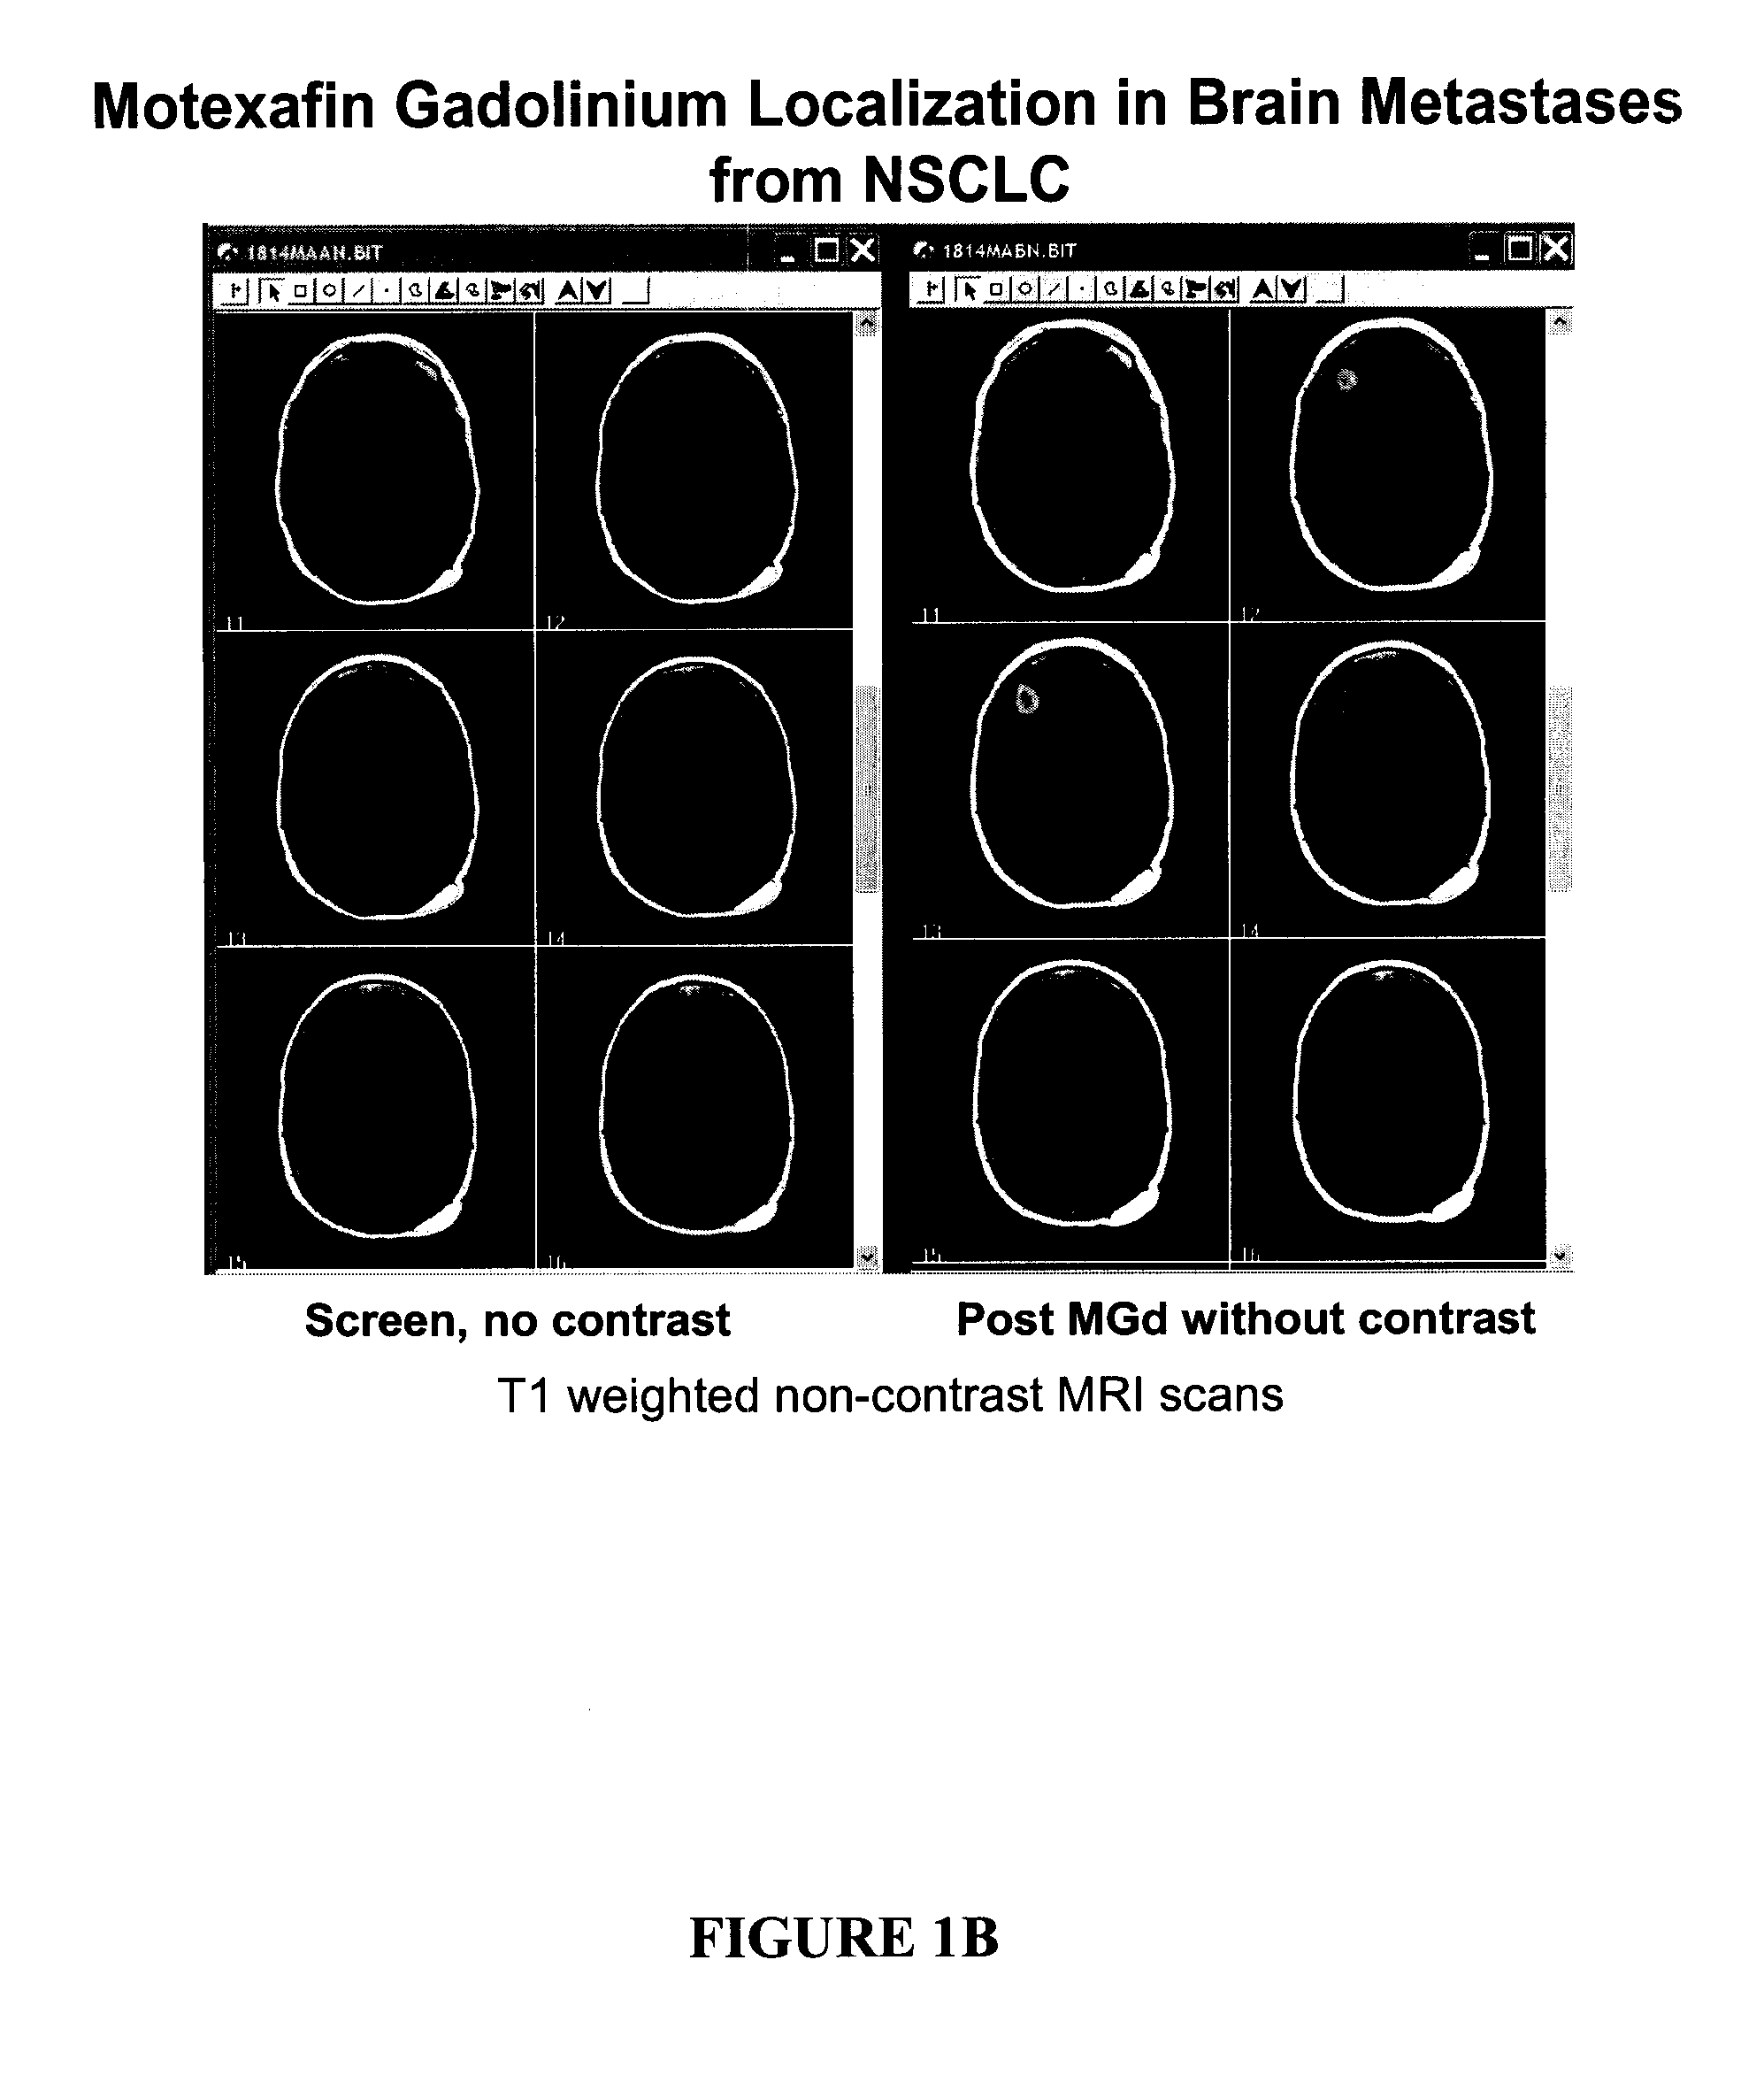 Methods of treating cancer using hypofractionated radiation and texaphyrins